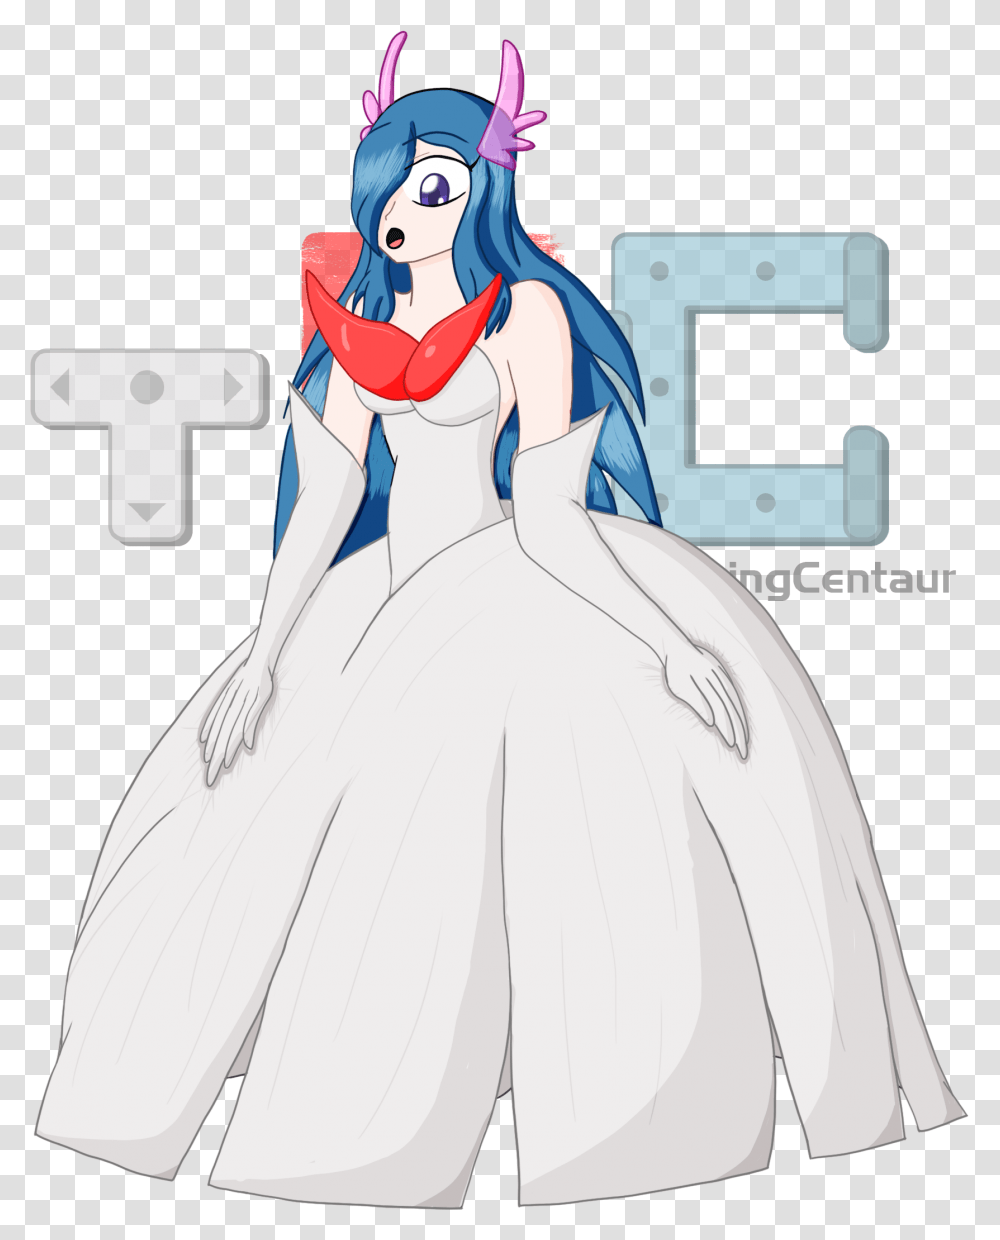 Zora In A Mega Gardevoir Gown By Thegamingcentaur Fictional Character, Clothing, Female, Person, Woman Transparent Png